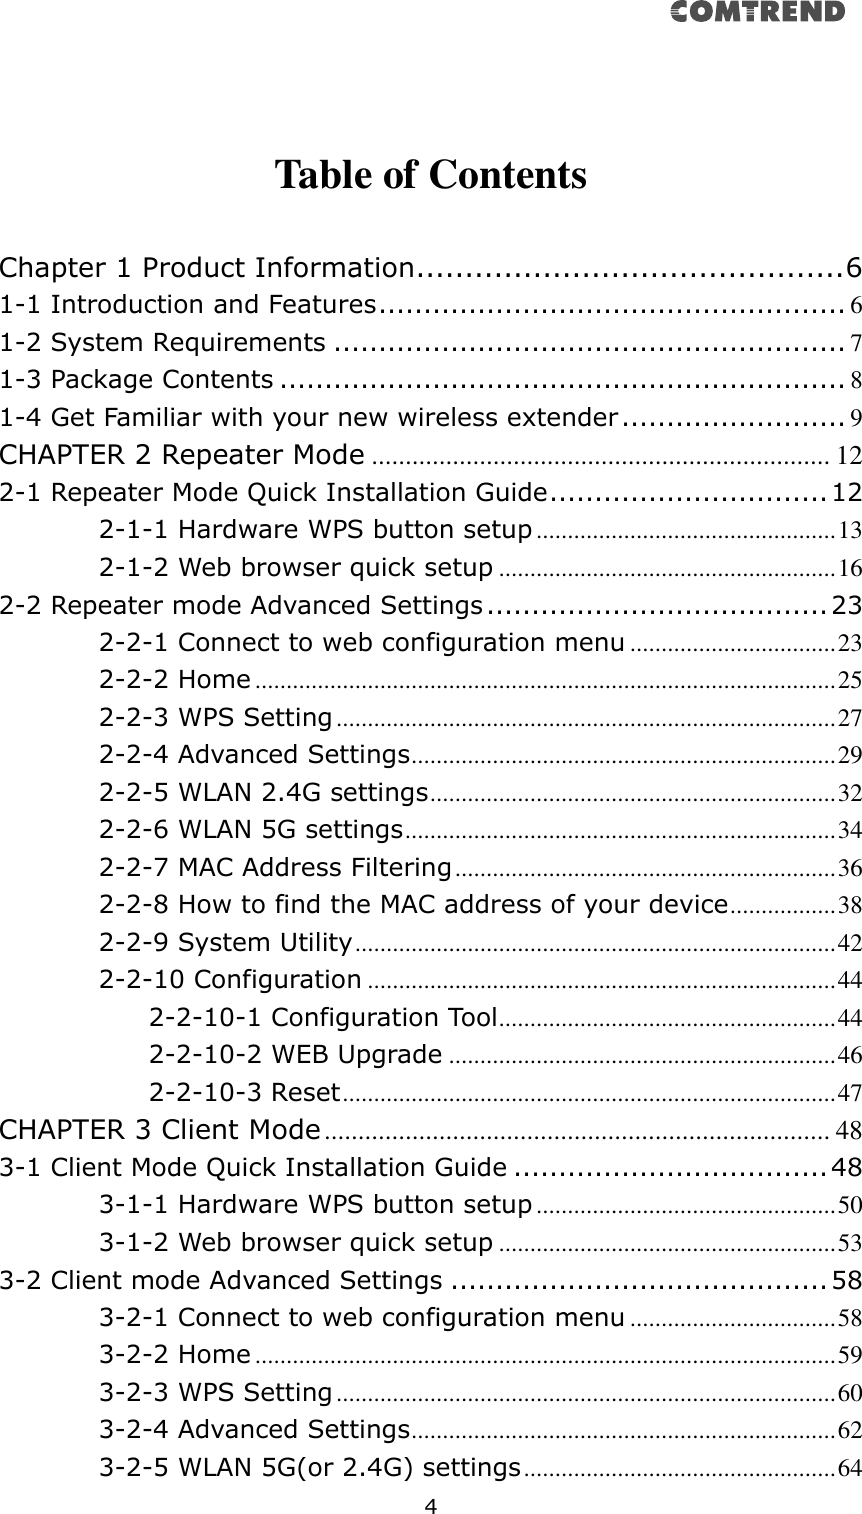   4     Table of Contents  Chapter 1 Product Information............................................ 6 1-1 Introduction and Features .................................................... 6 1-2 System Requirements ......................................................... 7 1-3 Package Contents ............................................................... 8 1-4 Get Familiar with your new wireless extender ......................... 9 CHAPTER 2 Repeater Mode .................................................................... 12 2-1 Repeater Mode Quick Installation Guide ............................... 12 2-1-1 Hardware WPS button setup ................................................ 13 2-1-2 Web browser quick setup ...................................................... 16 2-2 Repeater mode Advanced Settings ...................................... 23 2-2-1 Connect to web configuration menu ................................. 23 2-2-2 Home ............................................................................................. 25 2-2-3 WPS Setting ................................................................................ 27 2-2-4 Advanced Settings .................................................................... 29 2-2-5 WLAN 2.4G settings ................................................................. 32 2-2-6 WLAN 5G settings ..................................................................... 34 2-2-7 MAC Address Filtering ............................................................. 36 2-2-8 How to find the MAC address of your device ................. 38 2-2-9 System Utility ............................................................................. 42 2-2-10 Configuration ........................................................................... 44 2-2-10-1 Configuration Tool ...................................................... 44 2-2-10-2 WEB Upgrade .............................................................. 46 2-2-10-3 Reset ............................................................................... 47 CHAPTER 3 Client Mode ........................................................................... 48 3-1 Client Mode Quick Installation Guide ................................... 48 3-1-1 Hardware WPS button setup ................................................ 50 3-1-2 Web browser quick setup ...................................................... 53 3-2 Client mode Advanced Settings .......................................... 58 3-2-1 Connect to web configuration menu ................................. 58 3-2-2 Home ............................................................................................. 59 3-2-3 WPS Setting ................................................................................ 60 3-2-4 Advanced Settings .................................................................... 62 3-2-5 WLAN 5G(or 2.4G) settings .................................................. 64 